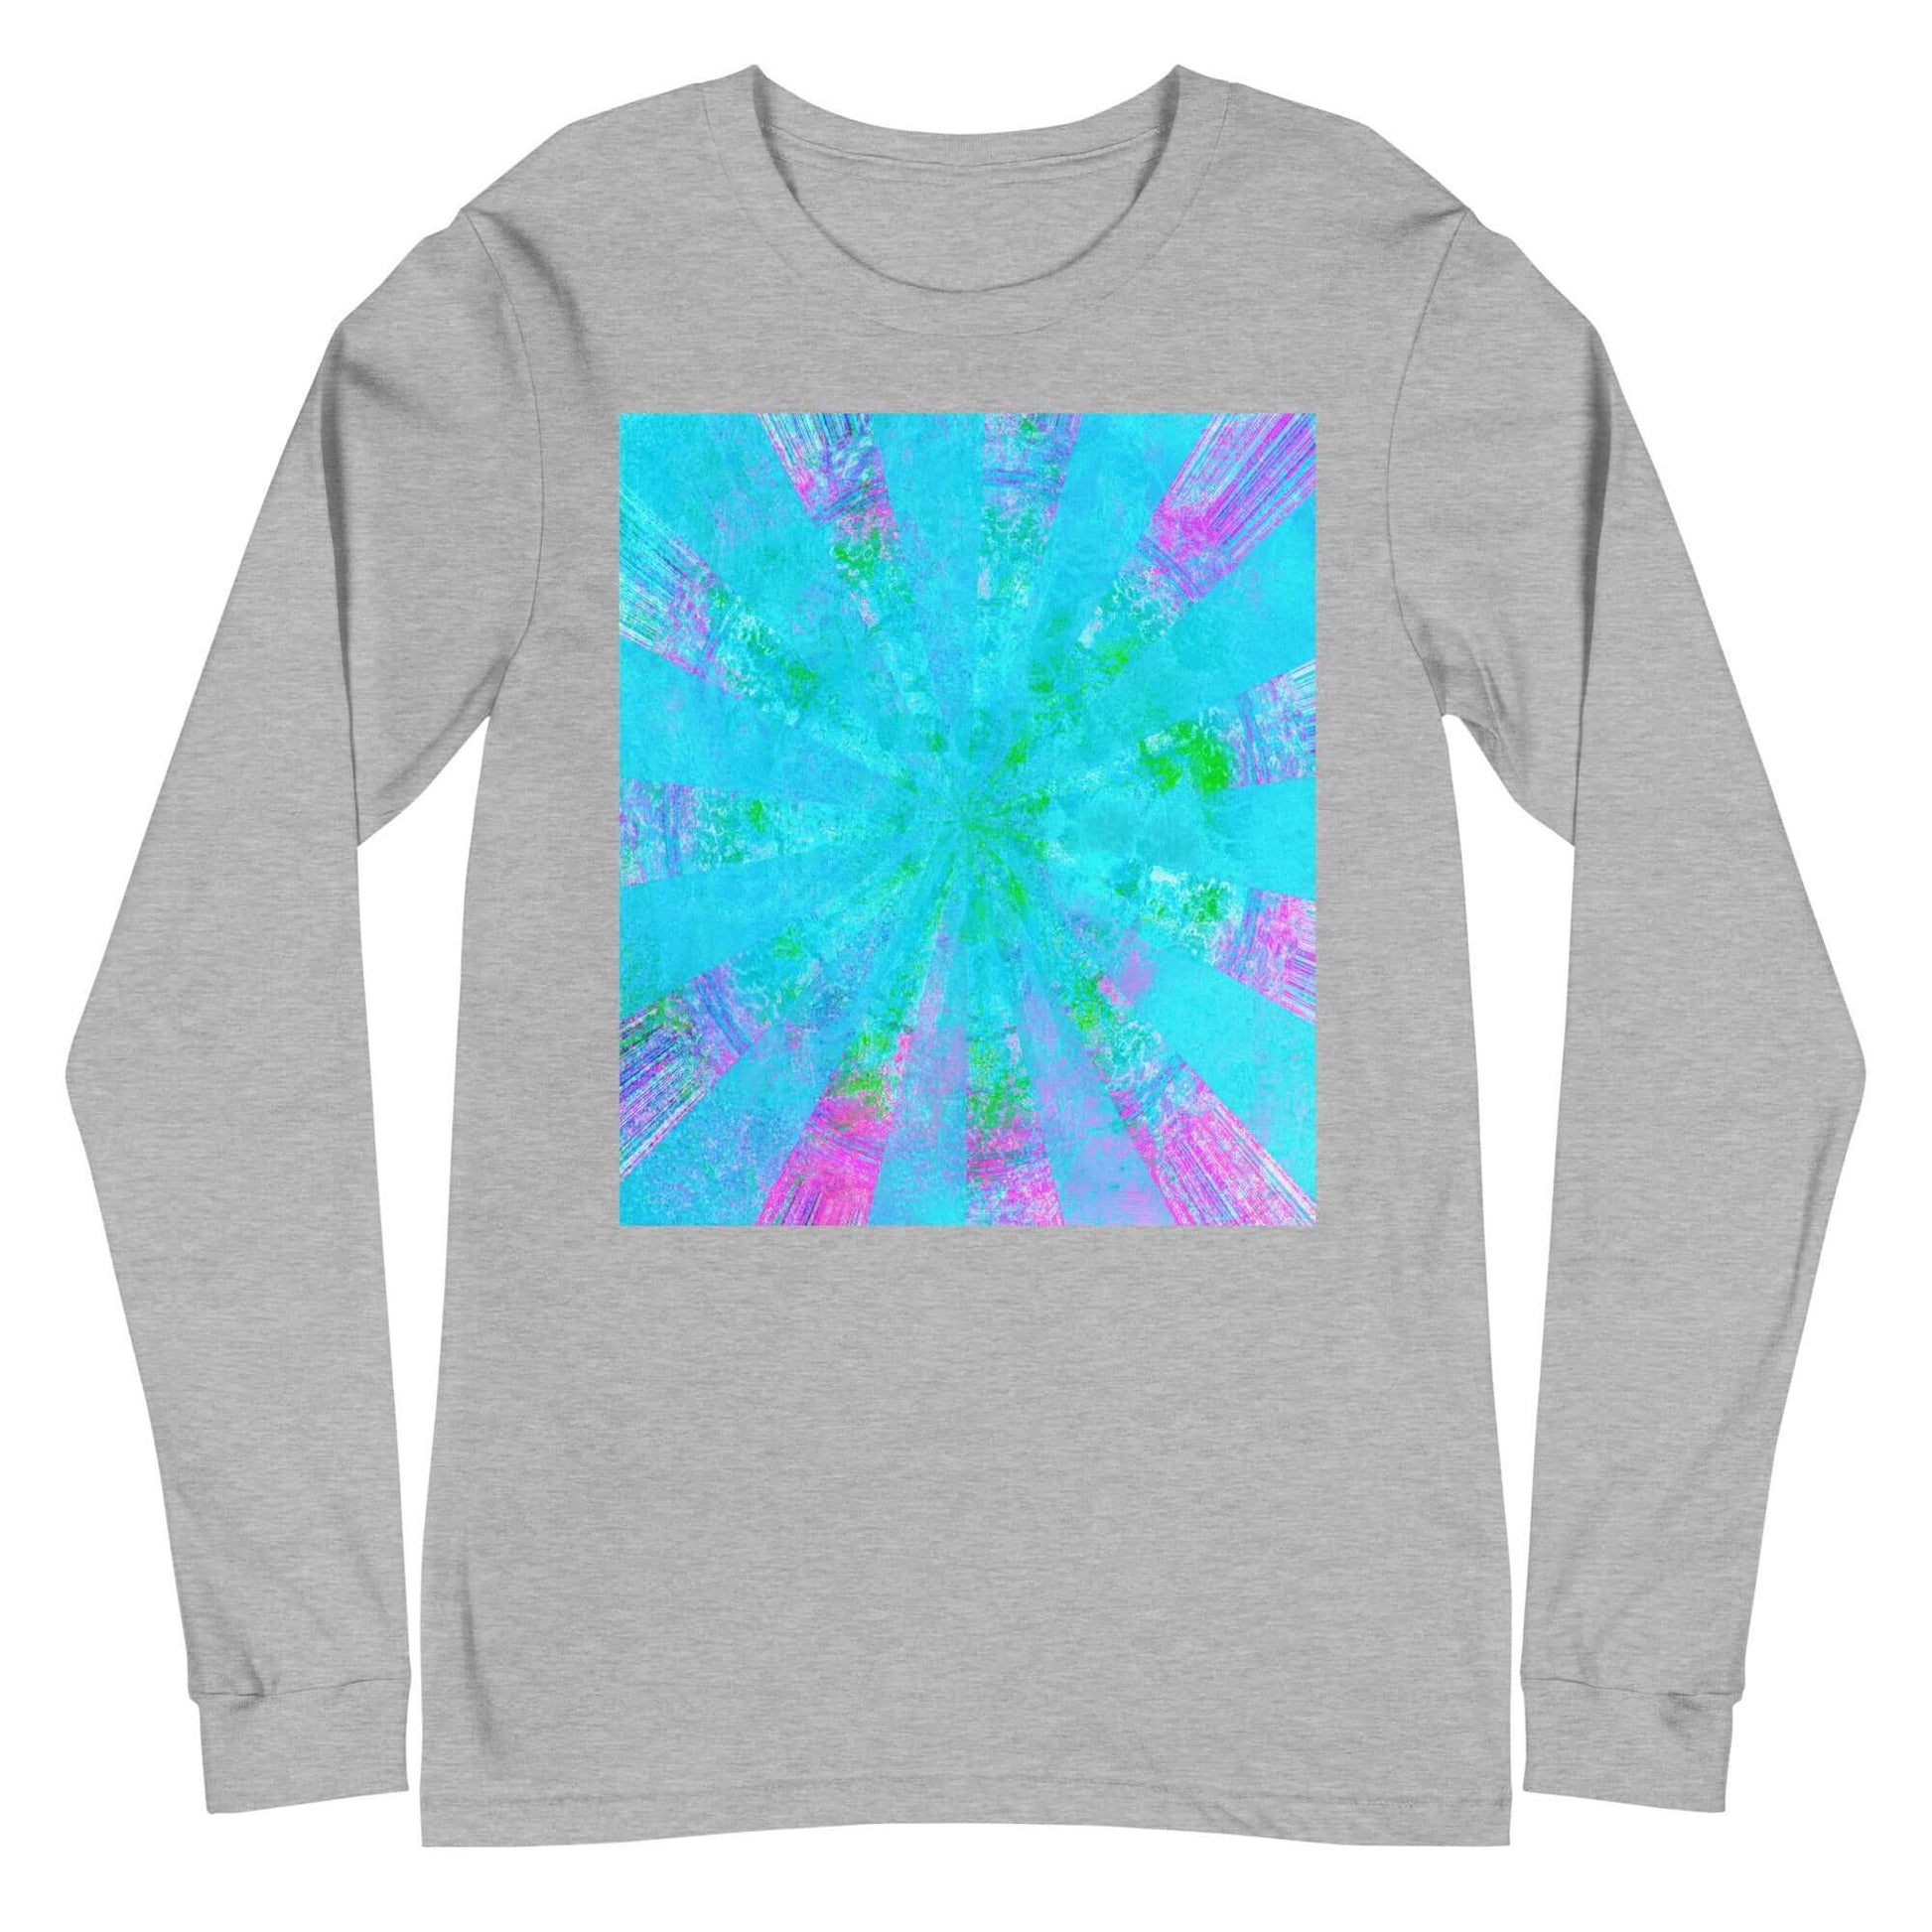 Turquoise Blue with Purple Radial Abstract Art “Blue Stingray” Unisex Long Sleeve Tee in Athletic Heather Gray